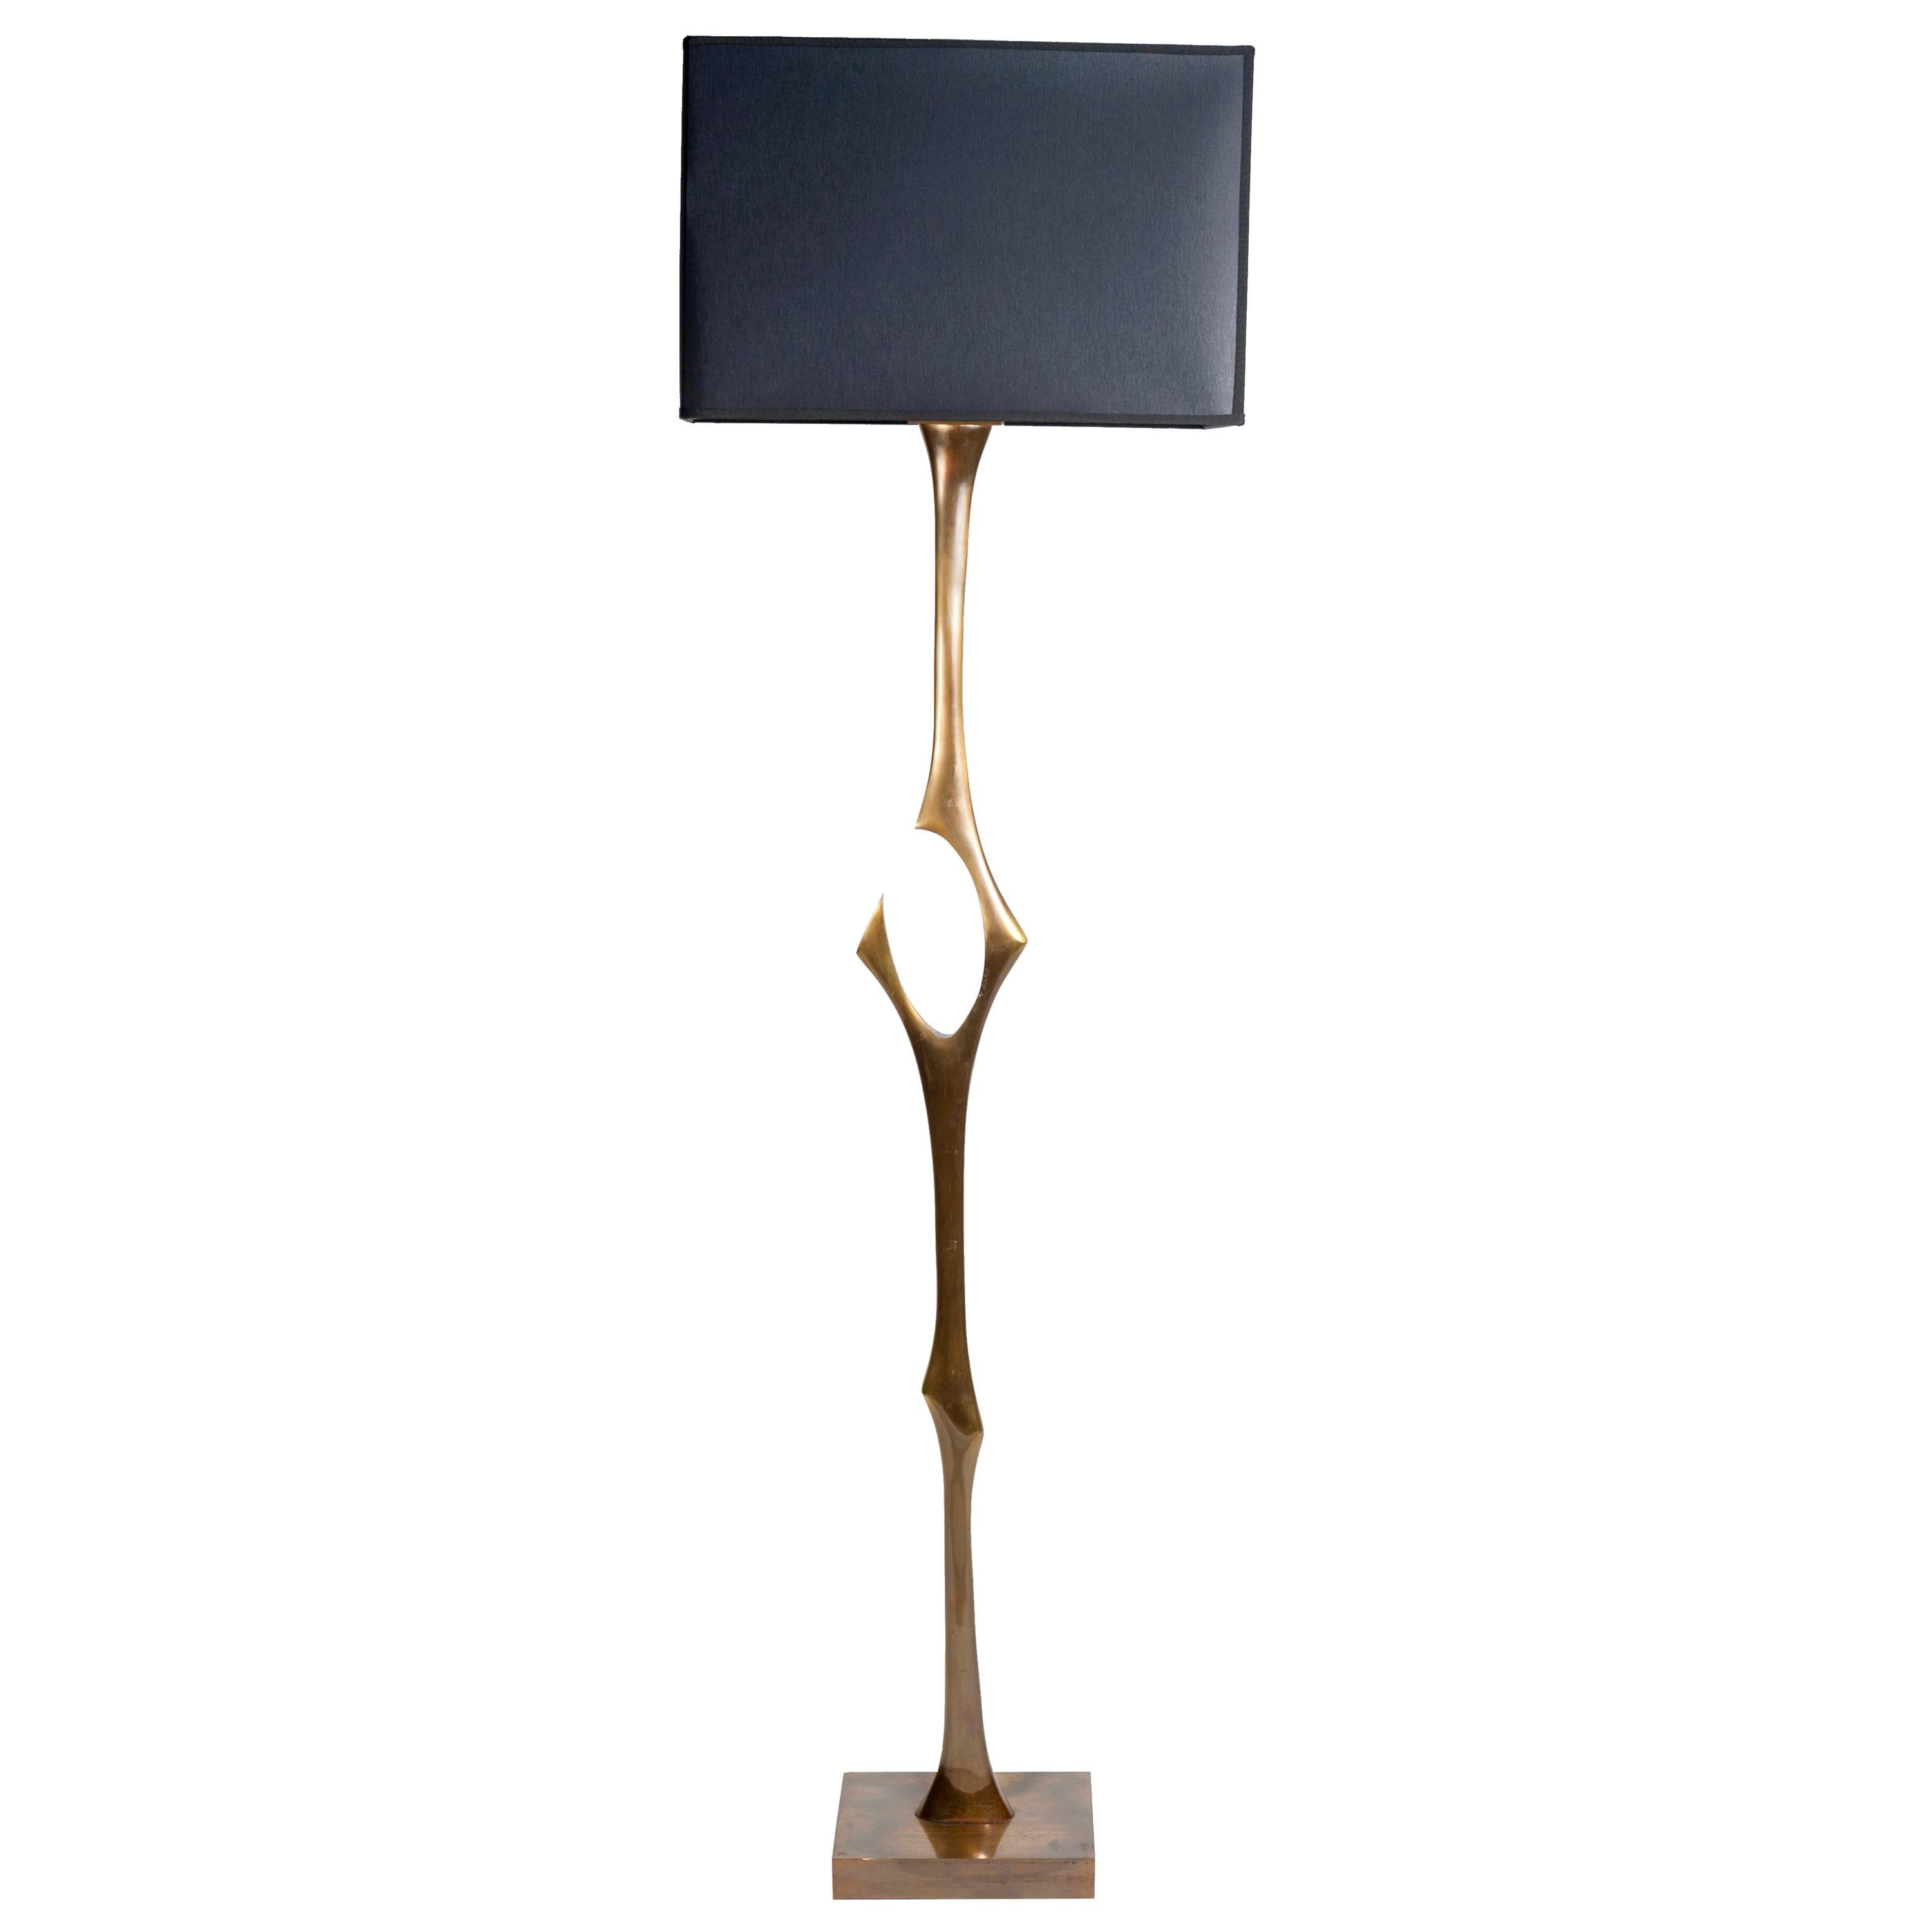 Rare Sculptural Bronze Floor Lamp by Willy Daro For Sale